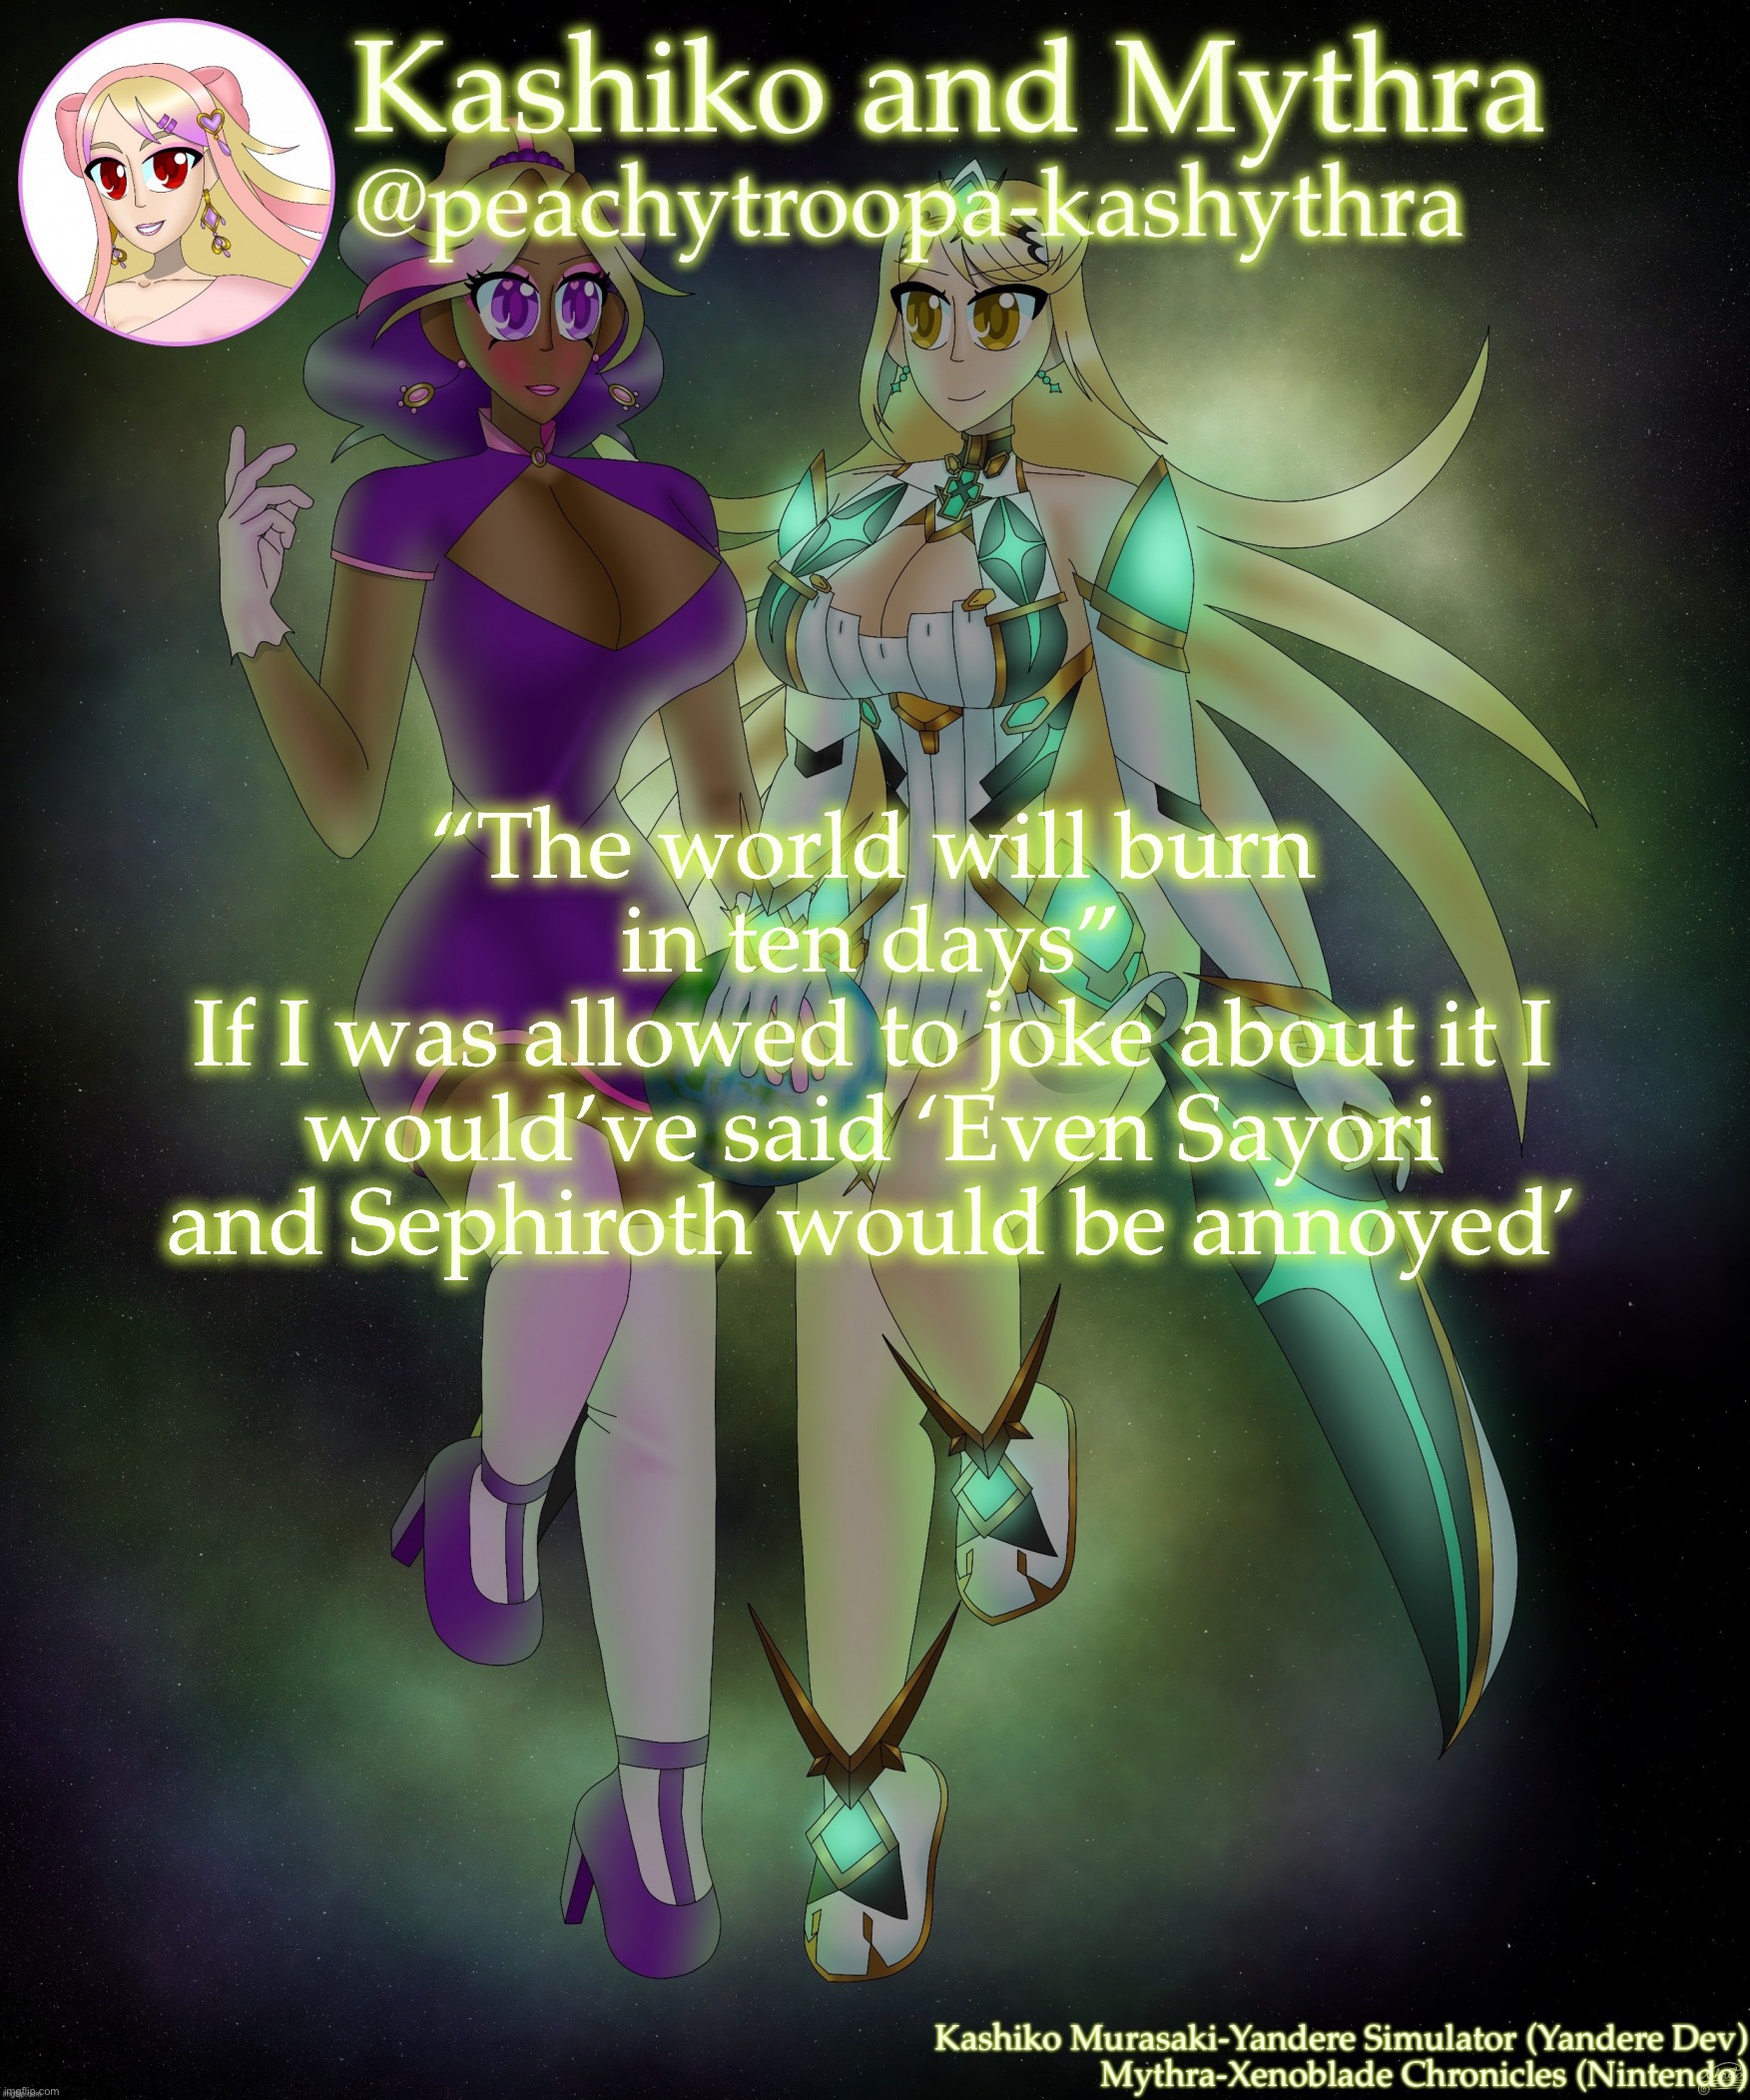 Idk why I’m so cringe | “The world will burn in ten days”
If I was allowed to joke about it I would’ve said ‘Even Sayori and Sephiroth would be annoyed’ | image tagged in kashiko murasaki and mythra | made w/ Imgflip meme maker